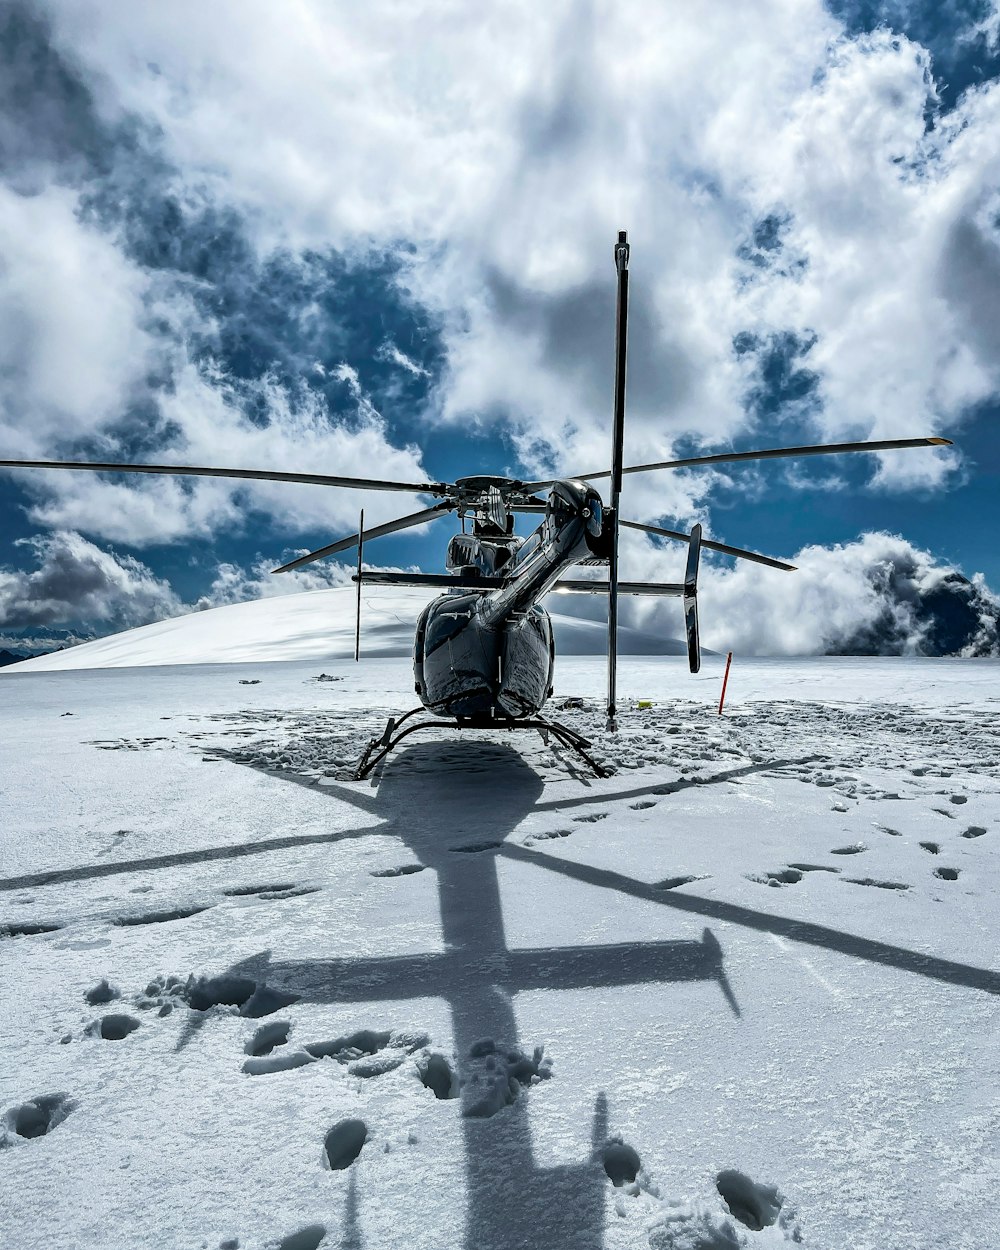 black and gray helicopter flying over snow covered ground under blue and white cloudy sky during